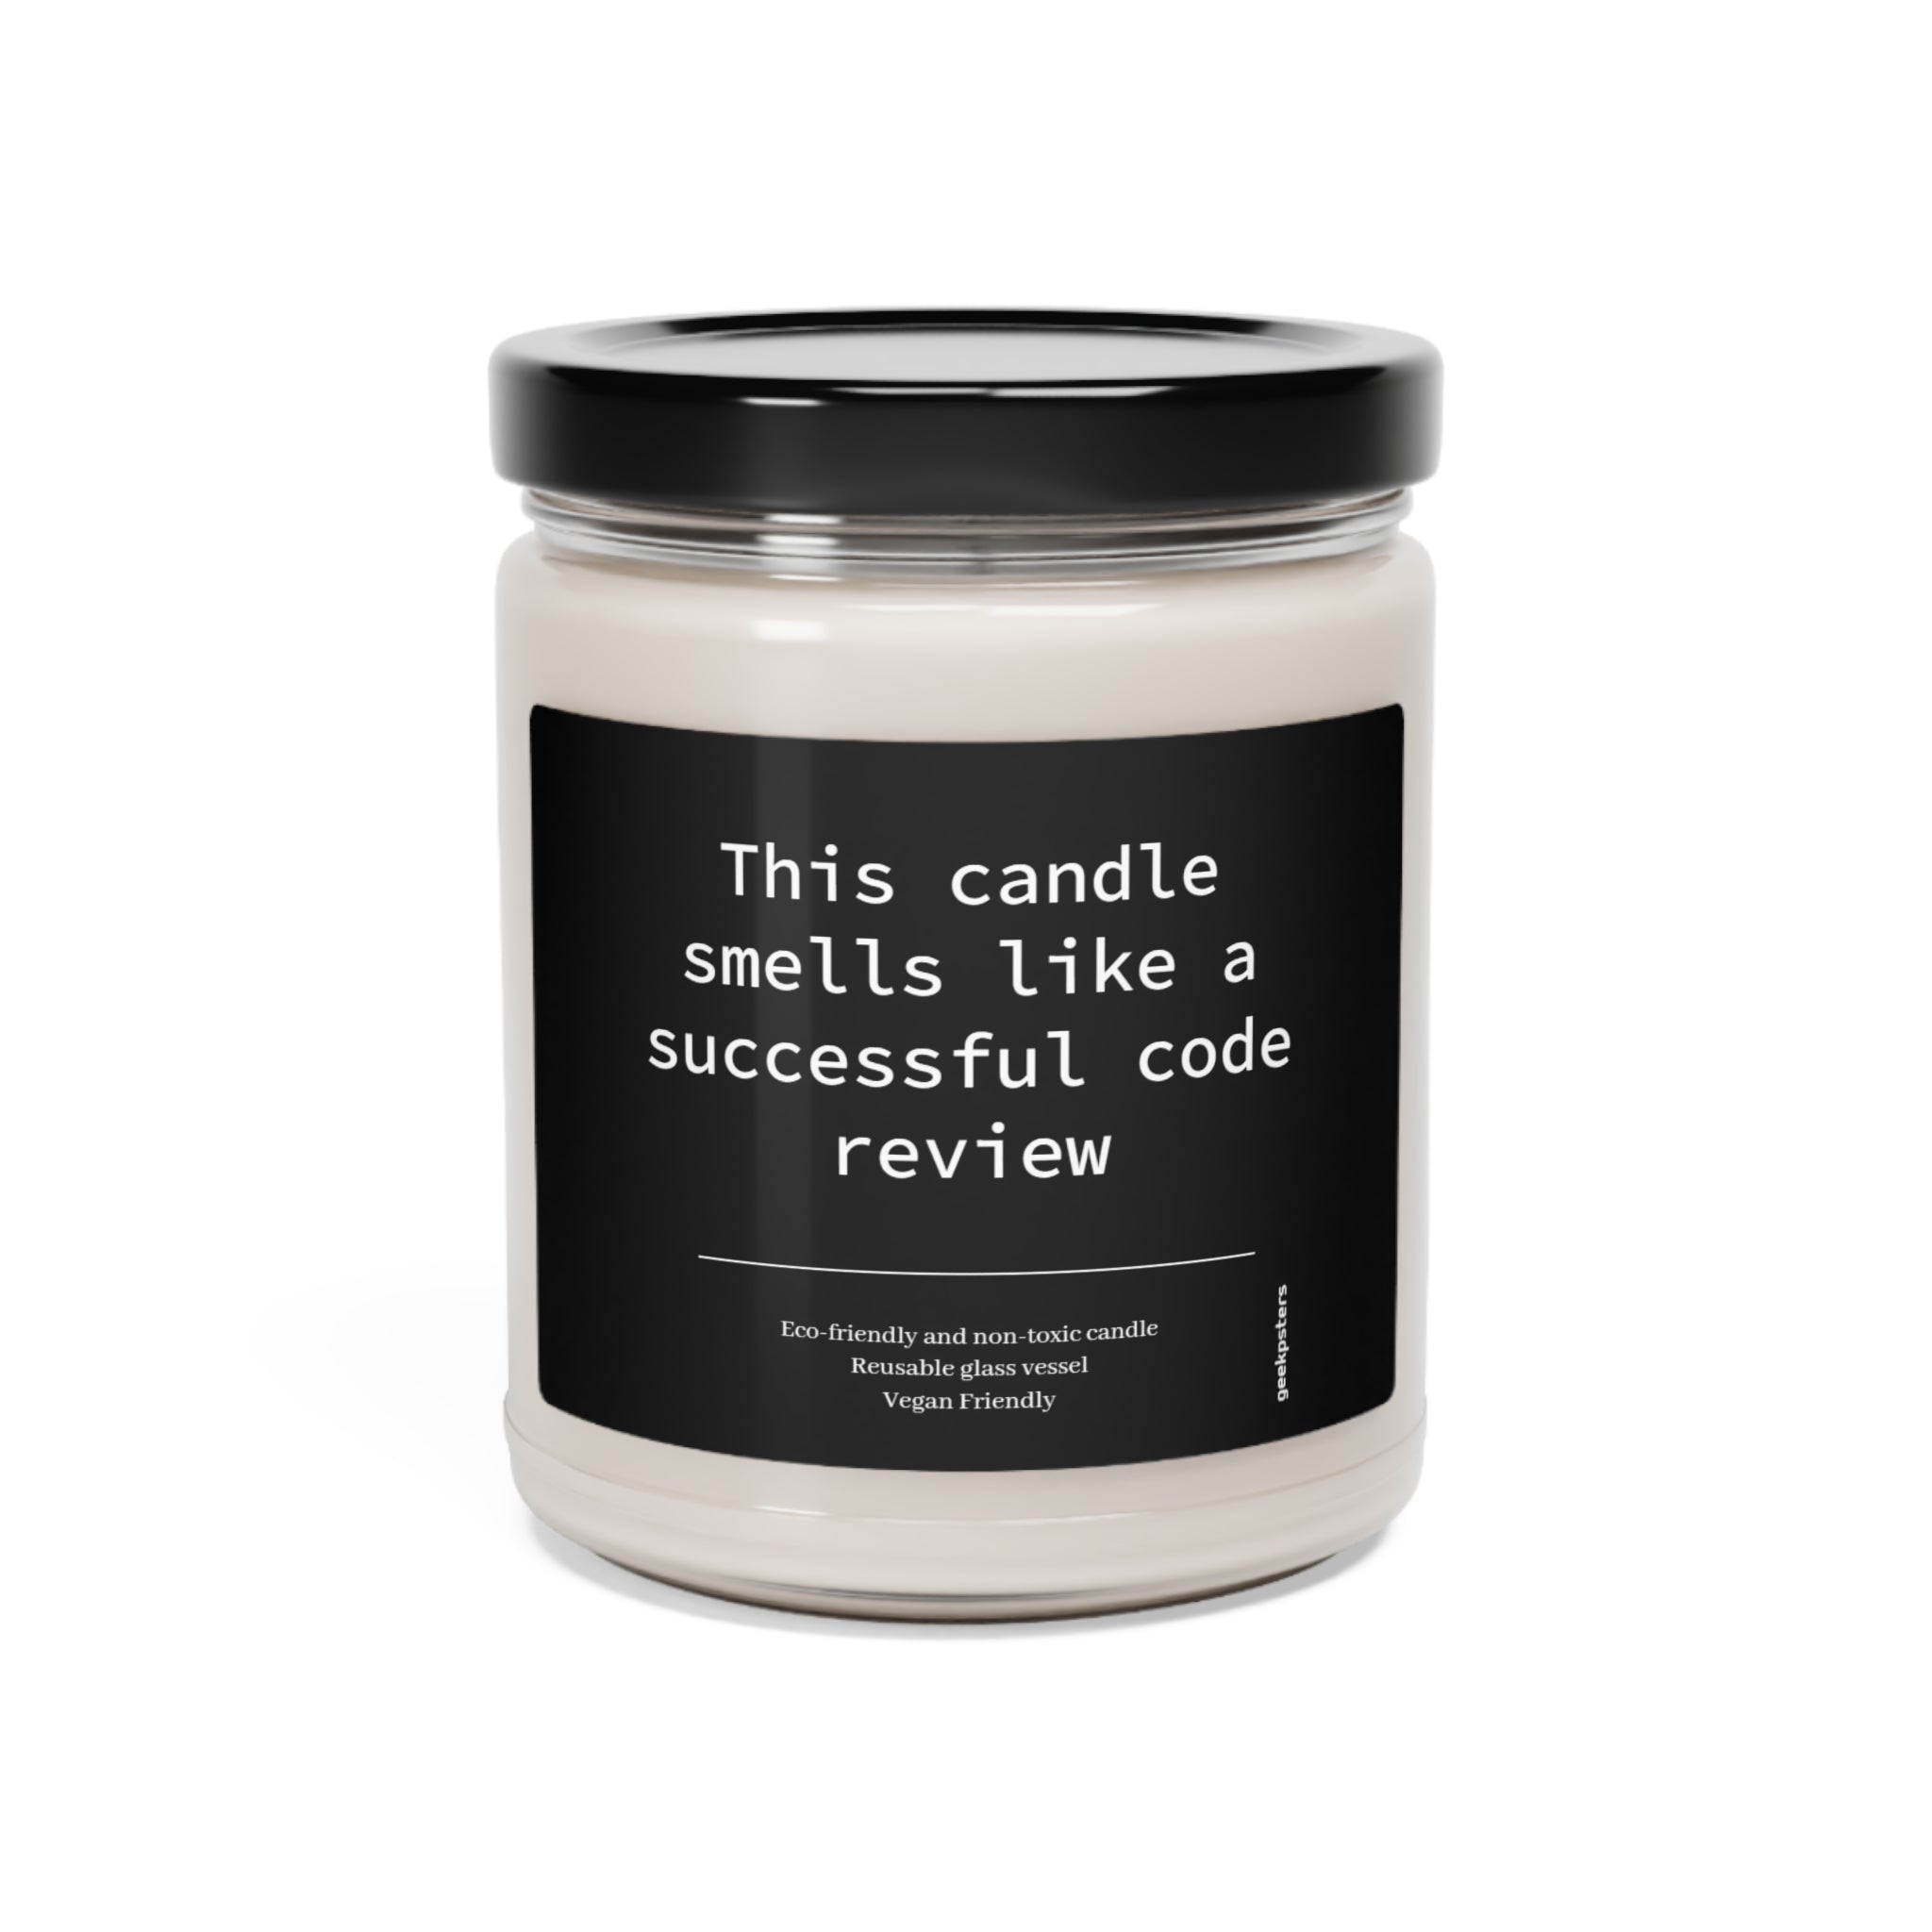 A This Candle Smells Like a Successful Code Review scented candle, contained in glass jars.